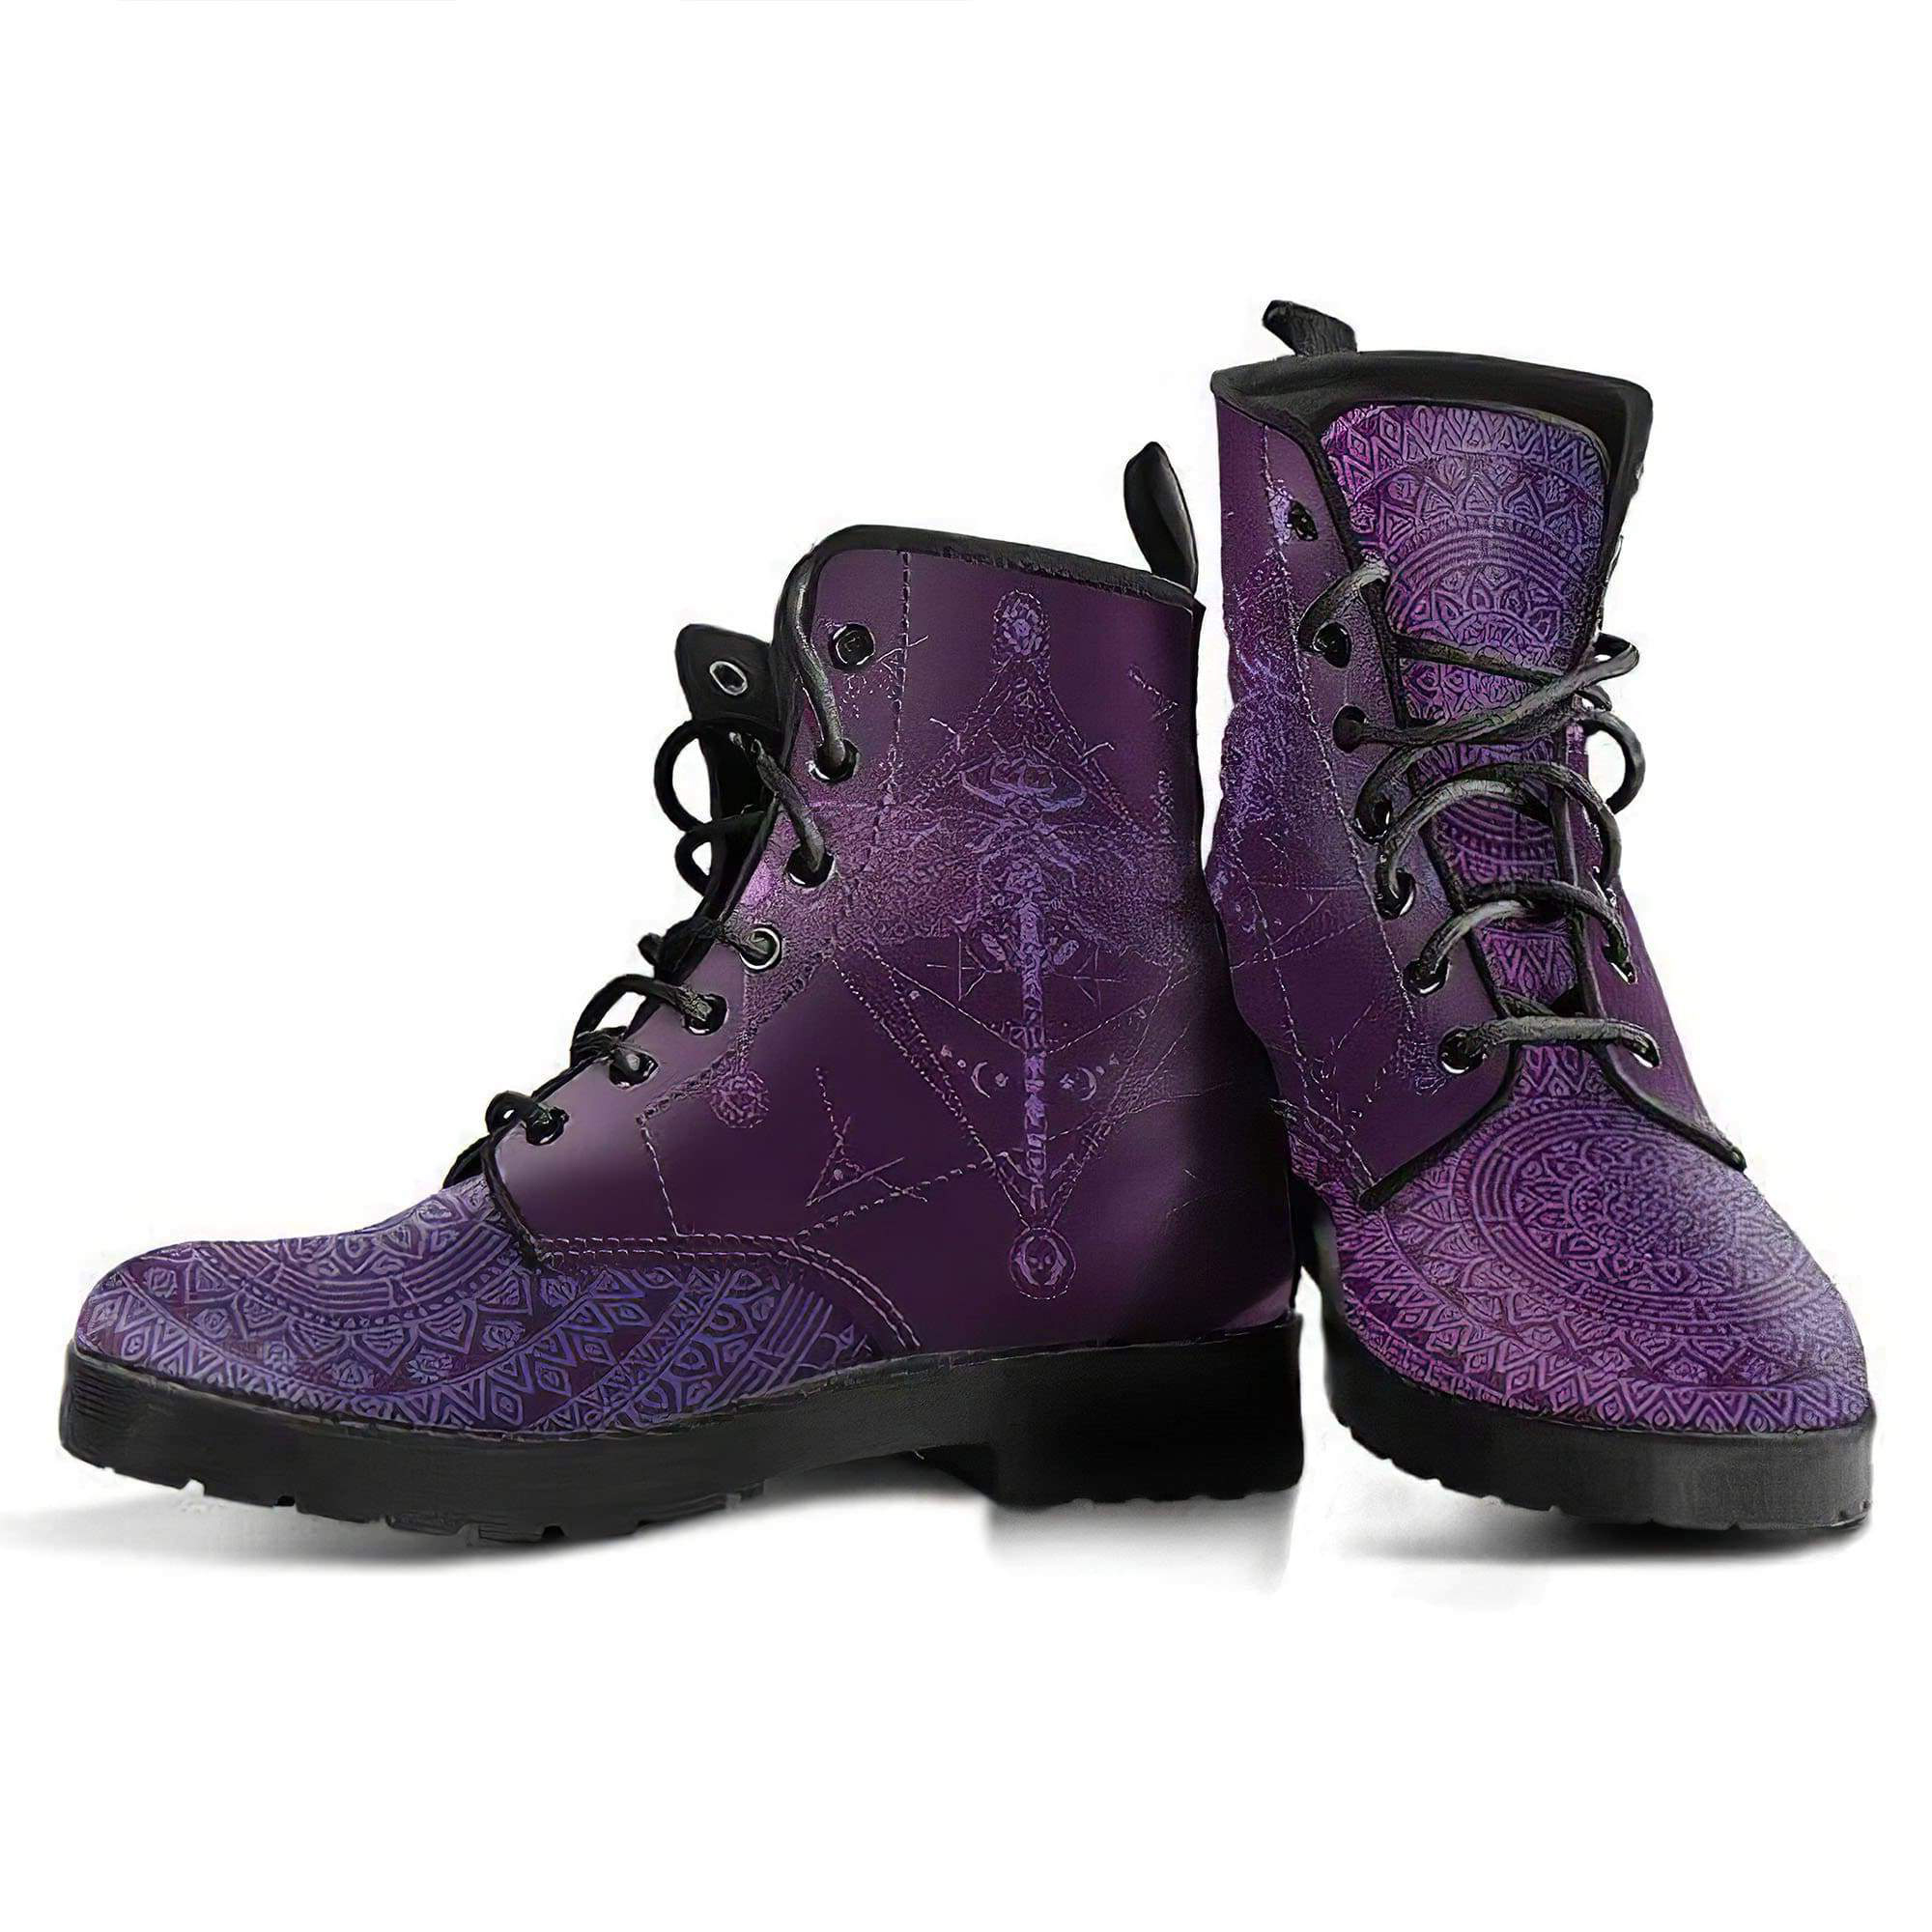 spiritual-dragonfly-handcrafted-boots-women-s-leather-boots-12051951812669.jpg